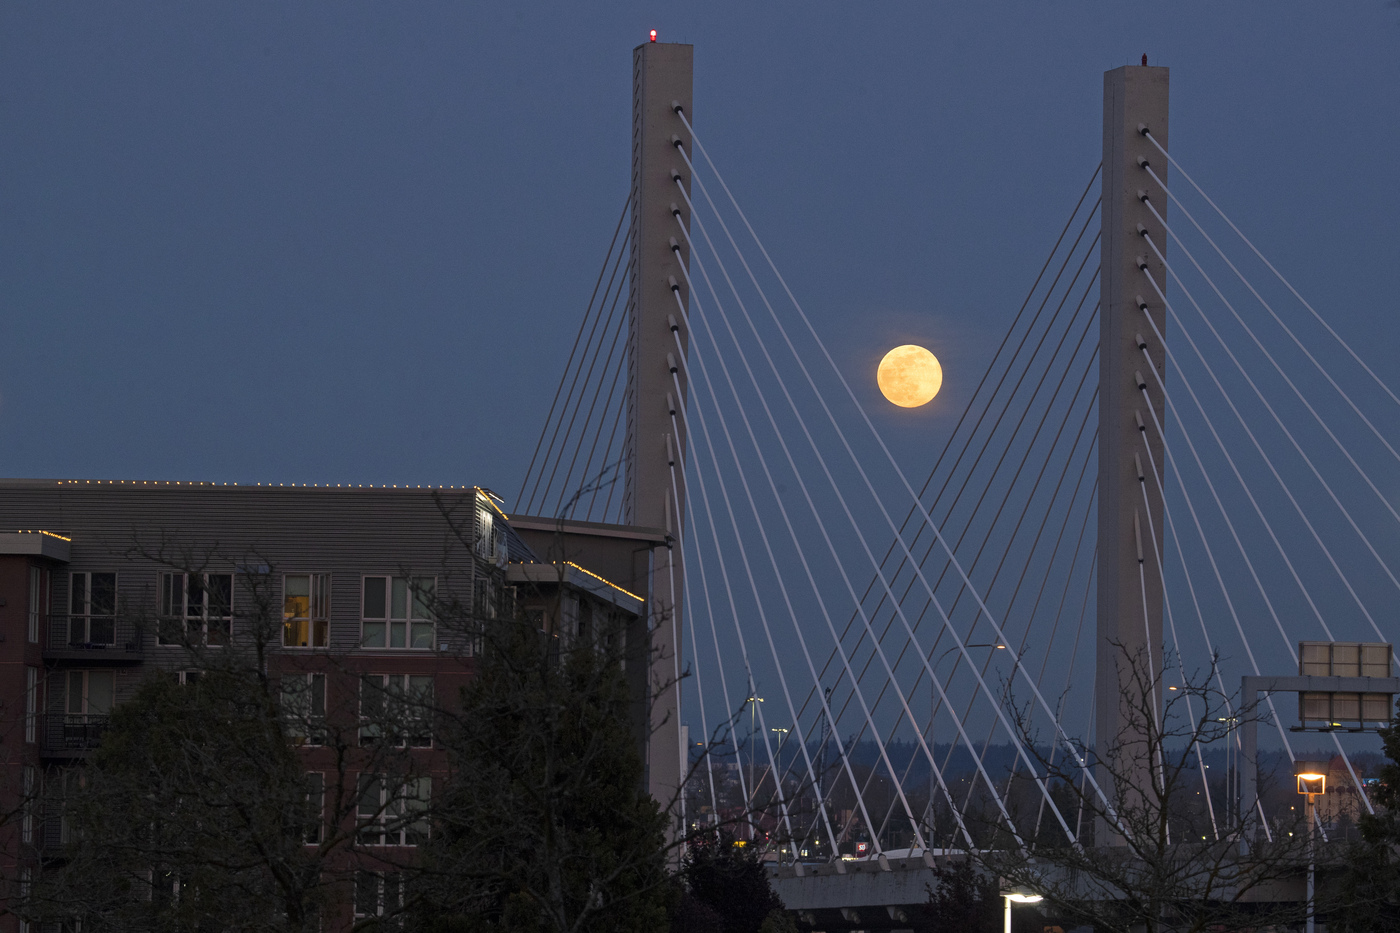 The so-called pink supermoon rises above the Highway 509 bridge over the Thea Foss Waterway, Tuesday, April 7, 2020, in Tacoma, Wash. April's full moon coincides with it being the closest to earth during its orbit in the year 2020, but the moon is only called pink due to it appearing each year around the same time as the blooming of a wildflower native to eastern North America. (AP Photo/Ted S. Warren)